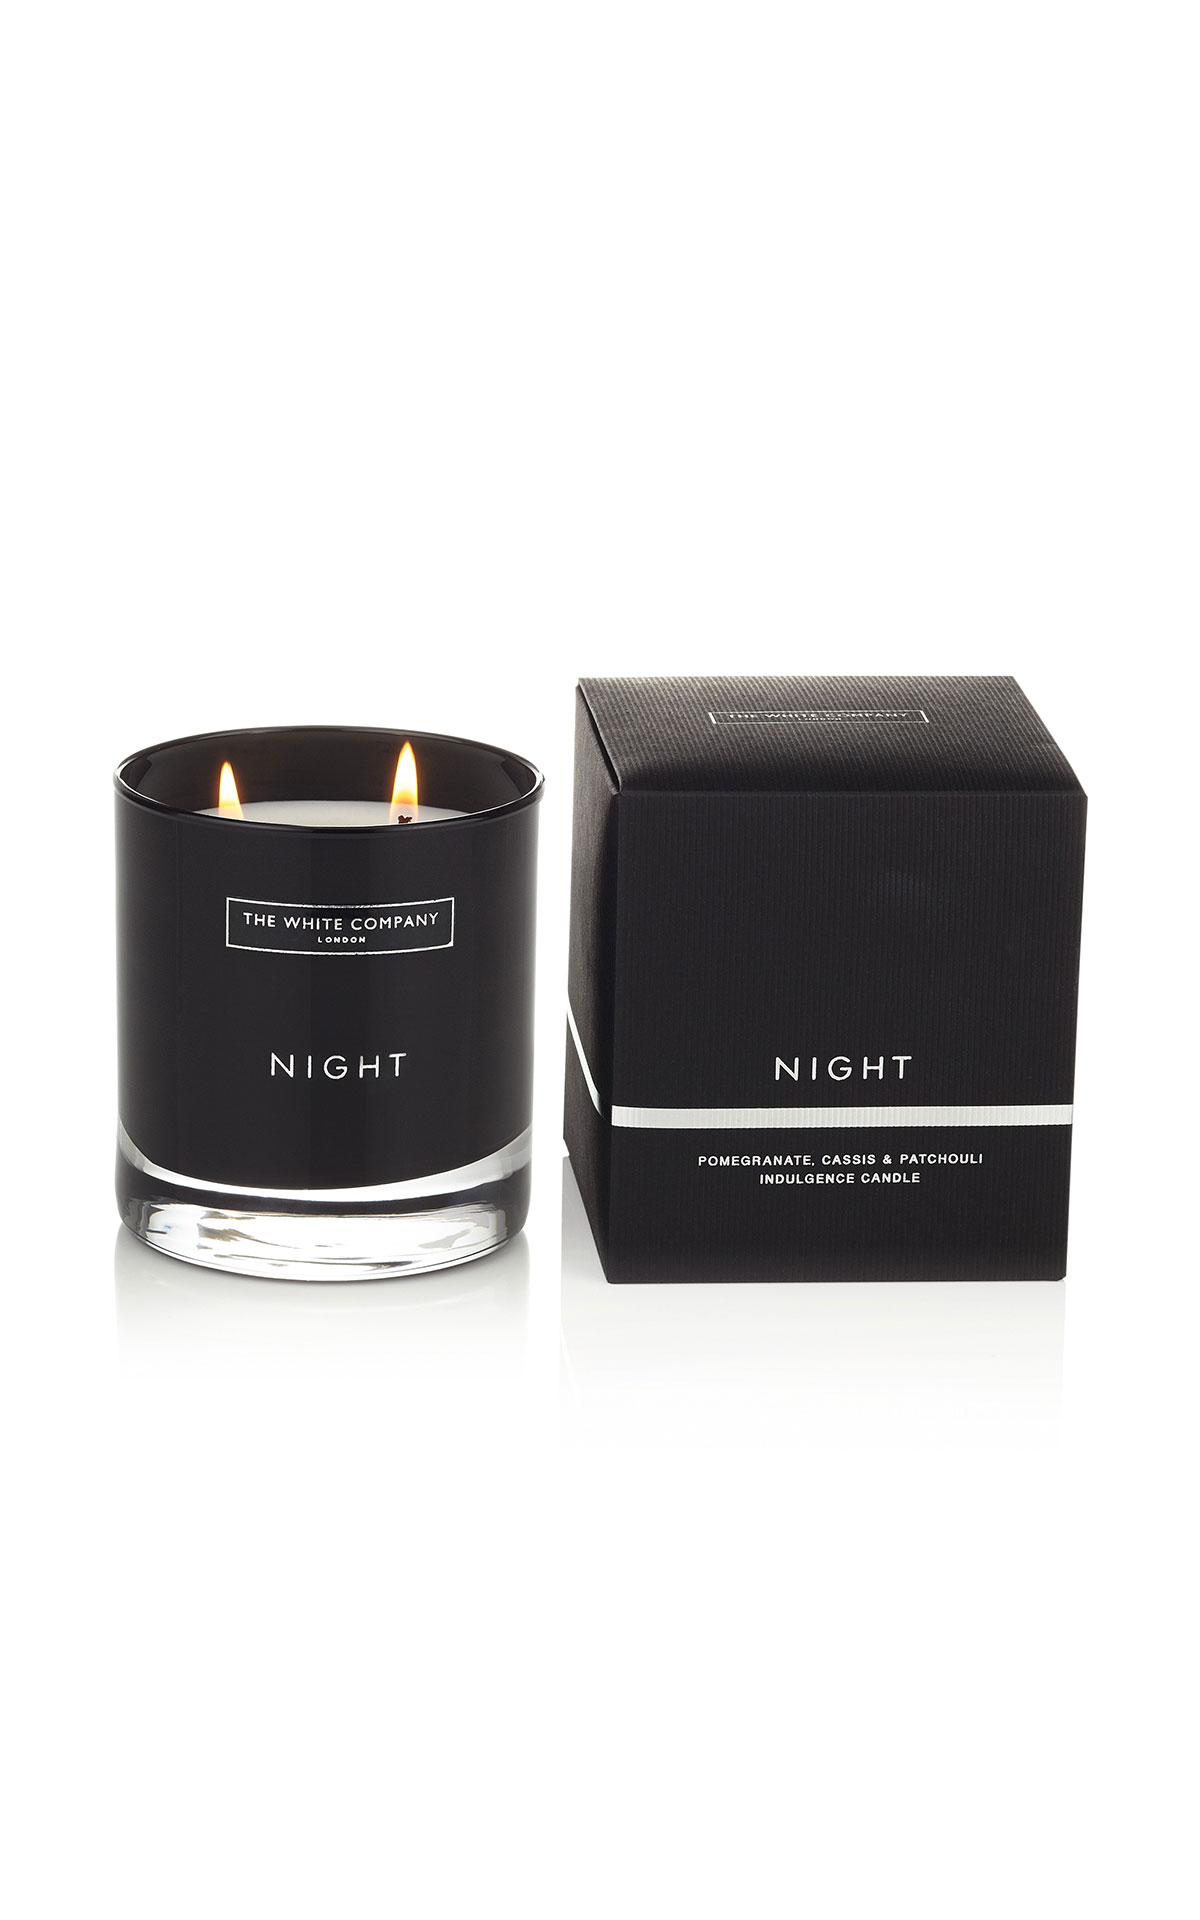 The White Company Night 2 wick candle from Bicester Village